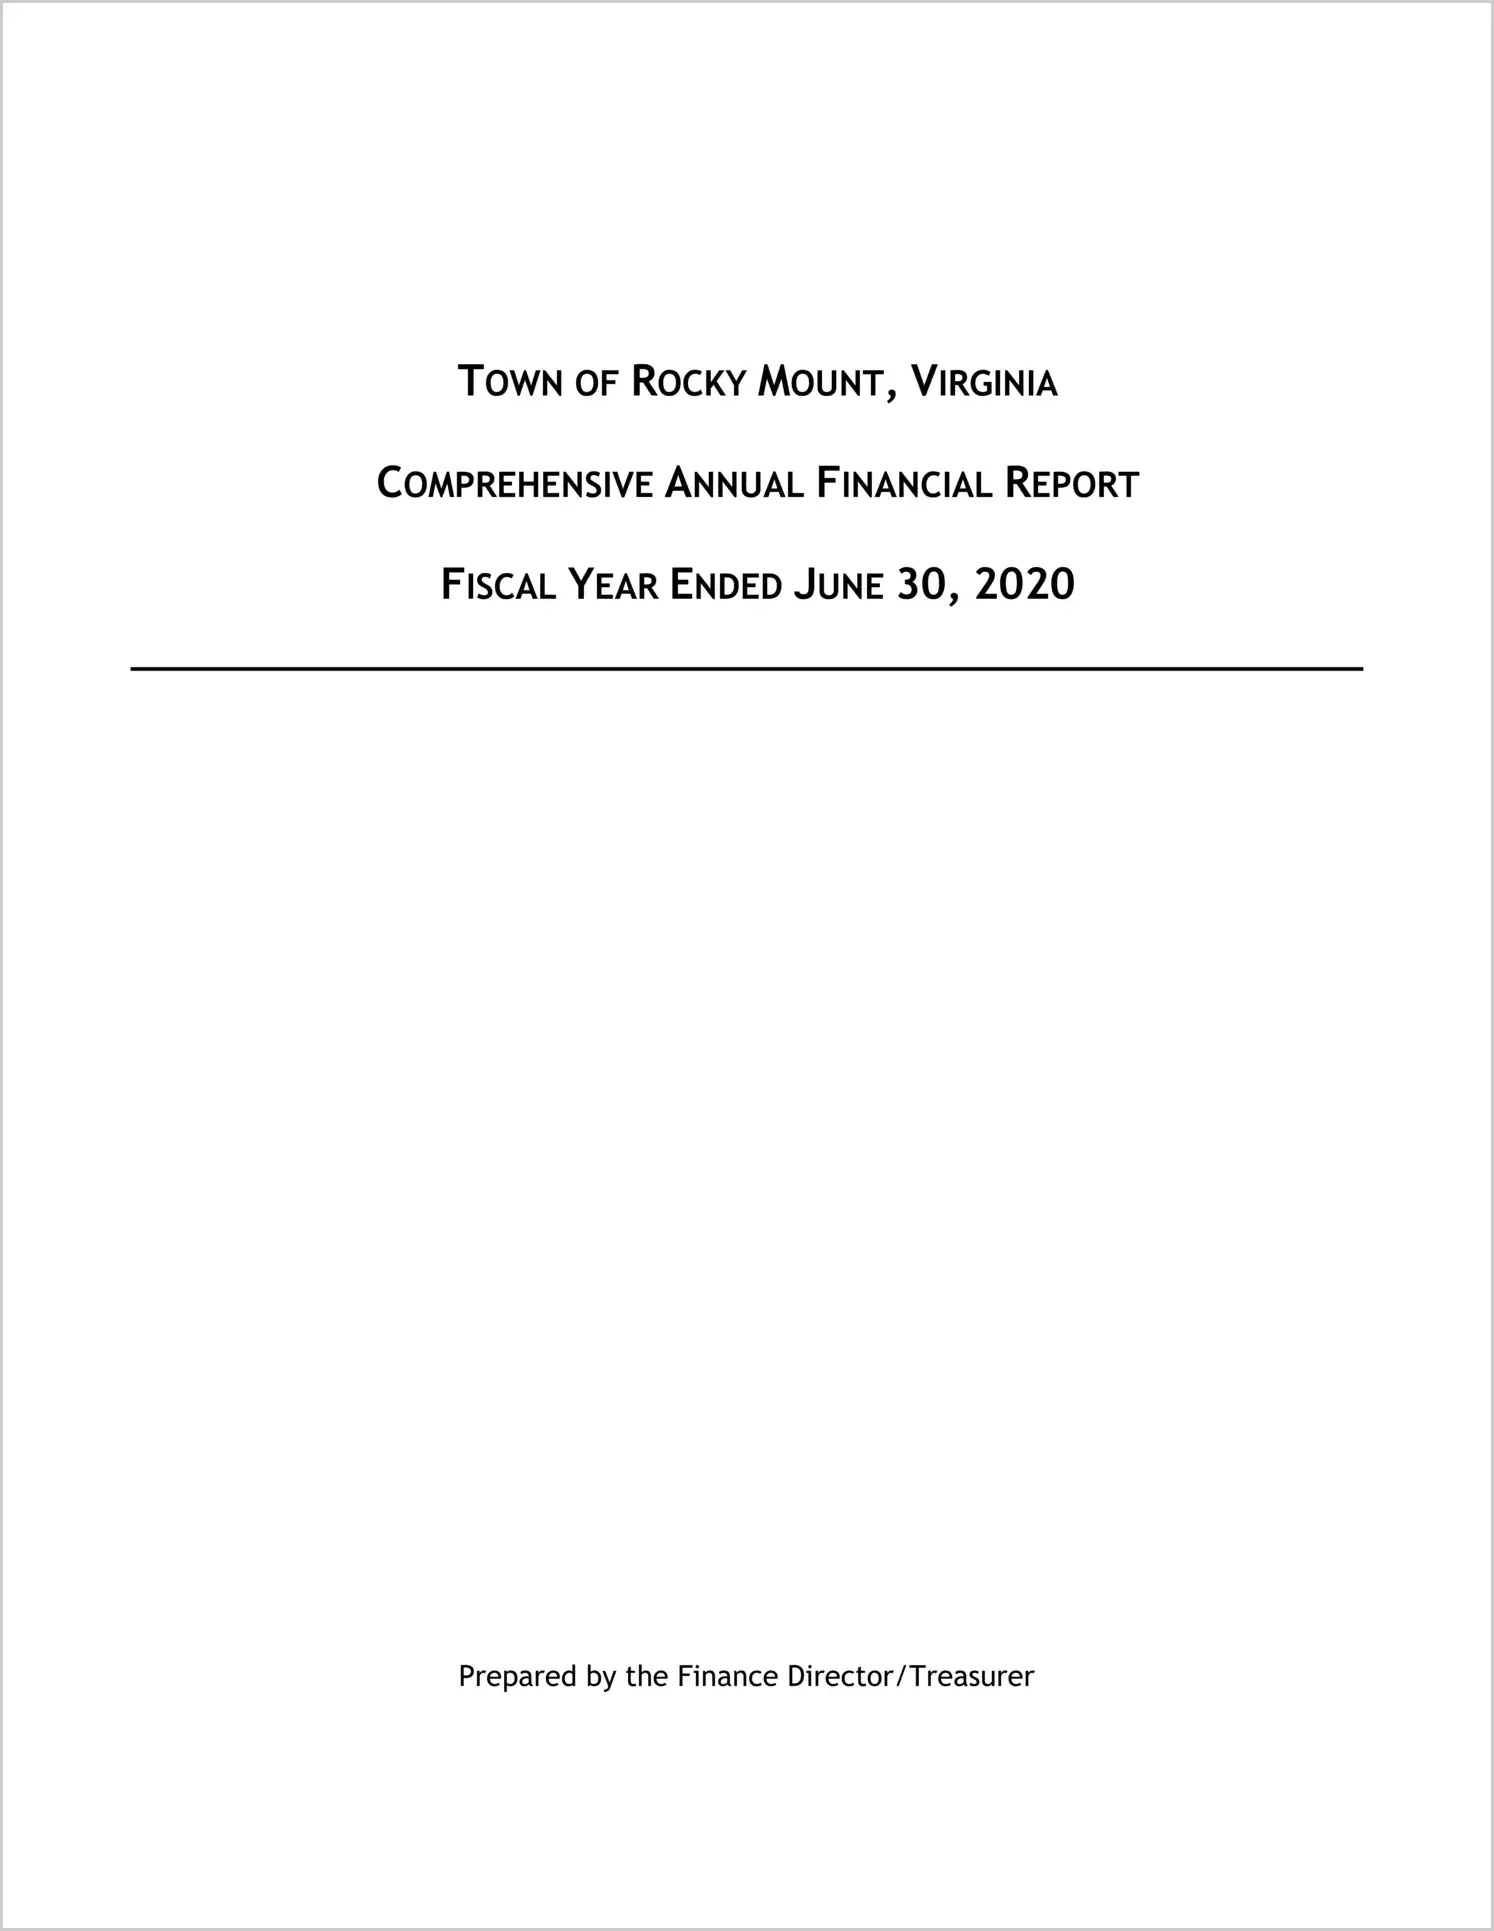 2020 Annual Financial Report for Town of Rocky Mount